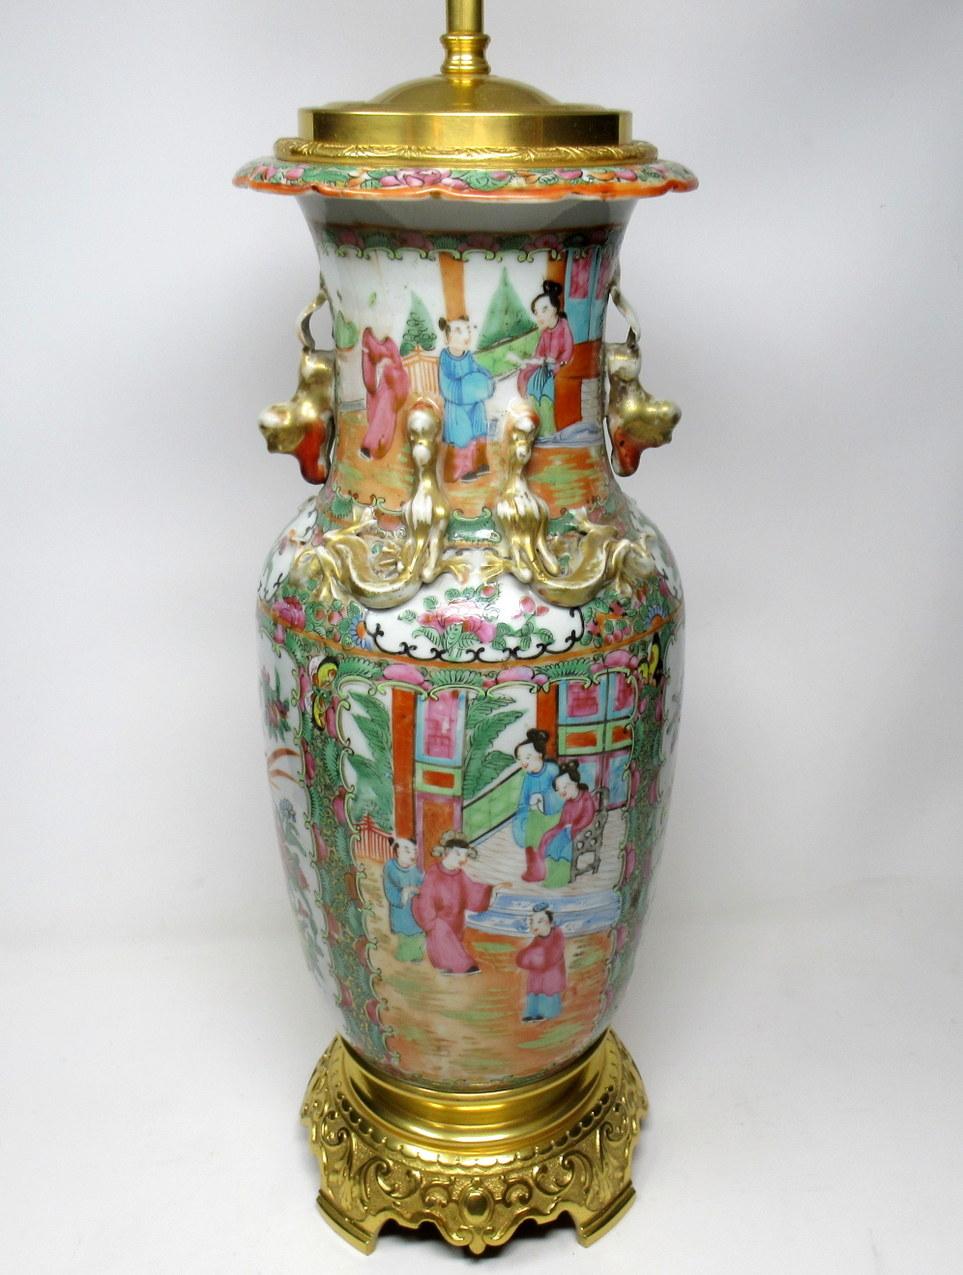 An exceptionally fine example of a Cantonese hand decorated Chinese export porcelain oil lamp no converted to an electric table lamp of good size proportions, with its original highly ornate mounts and lavish cast footed base, mid-19th